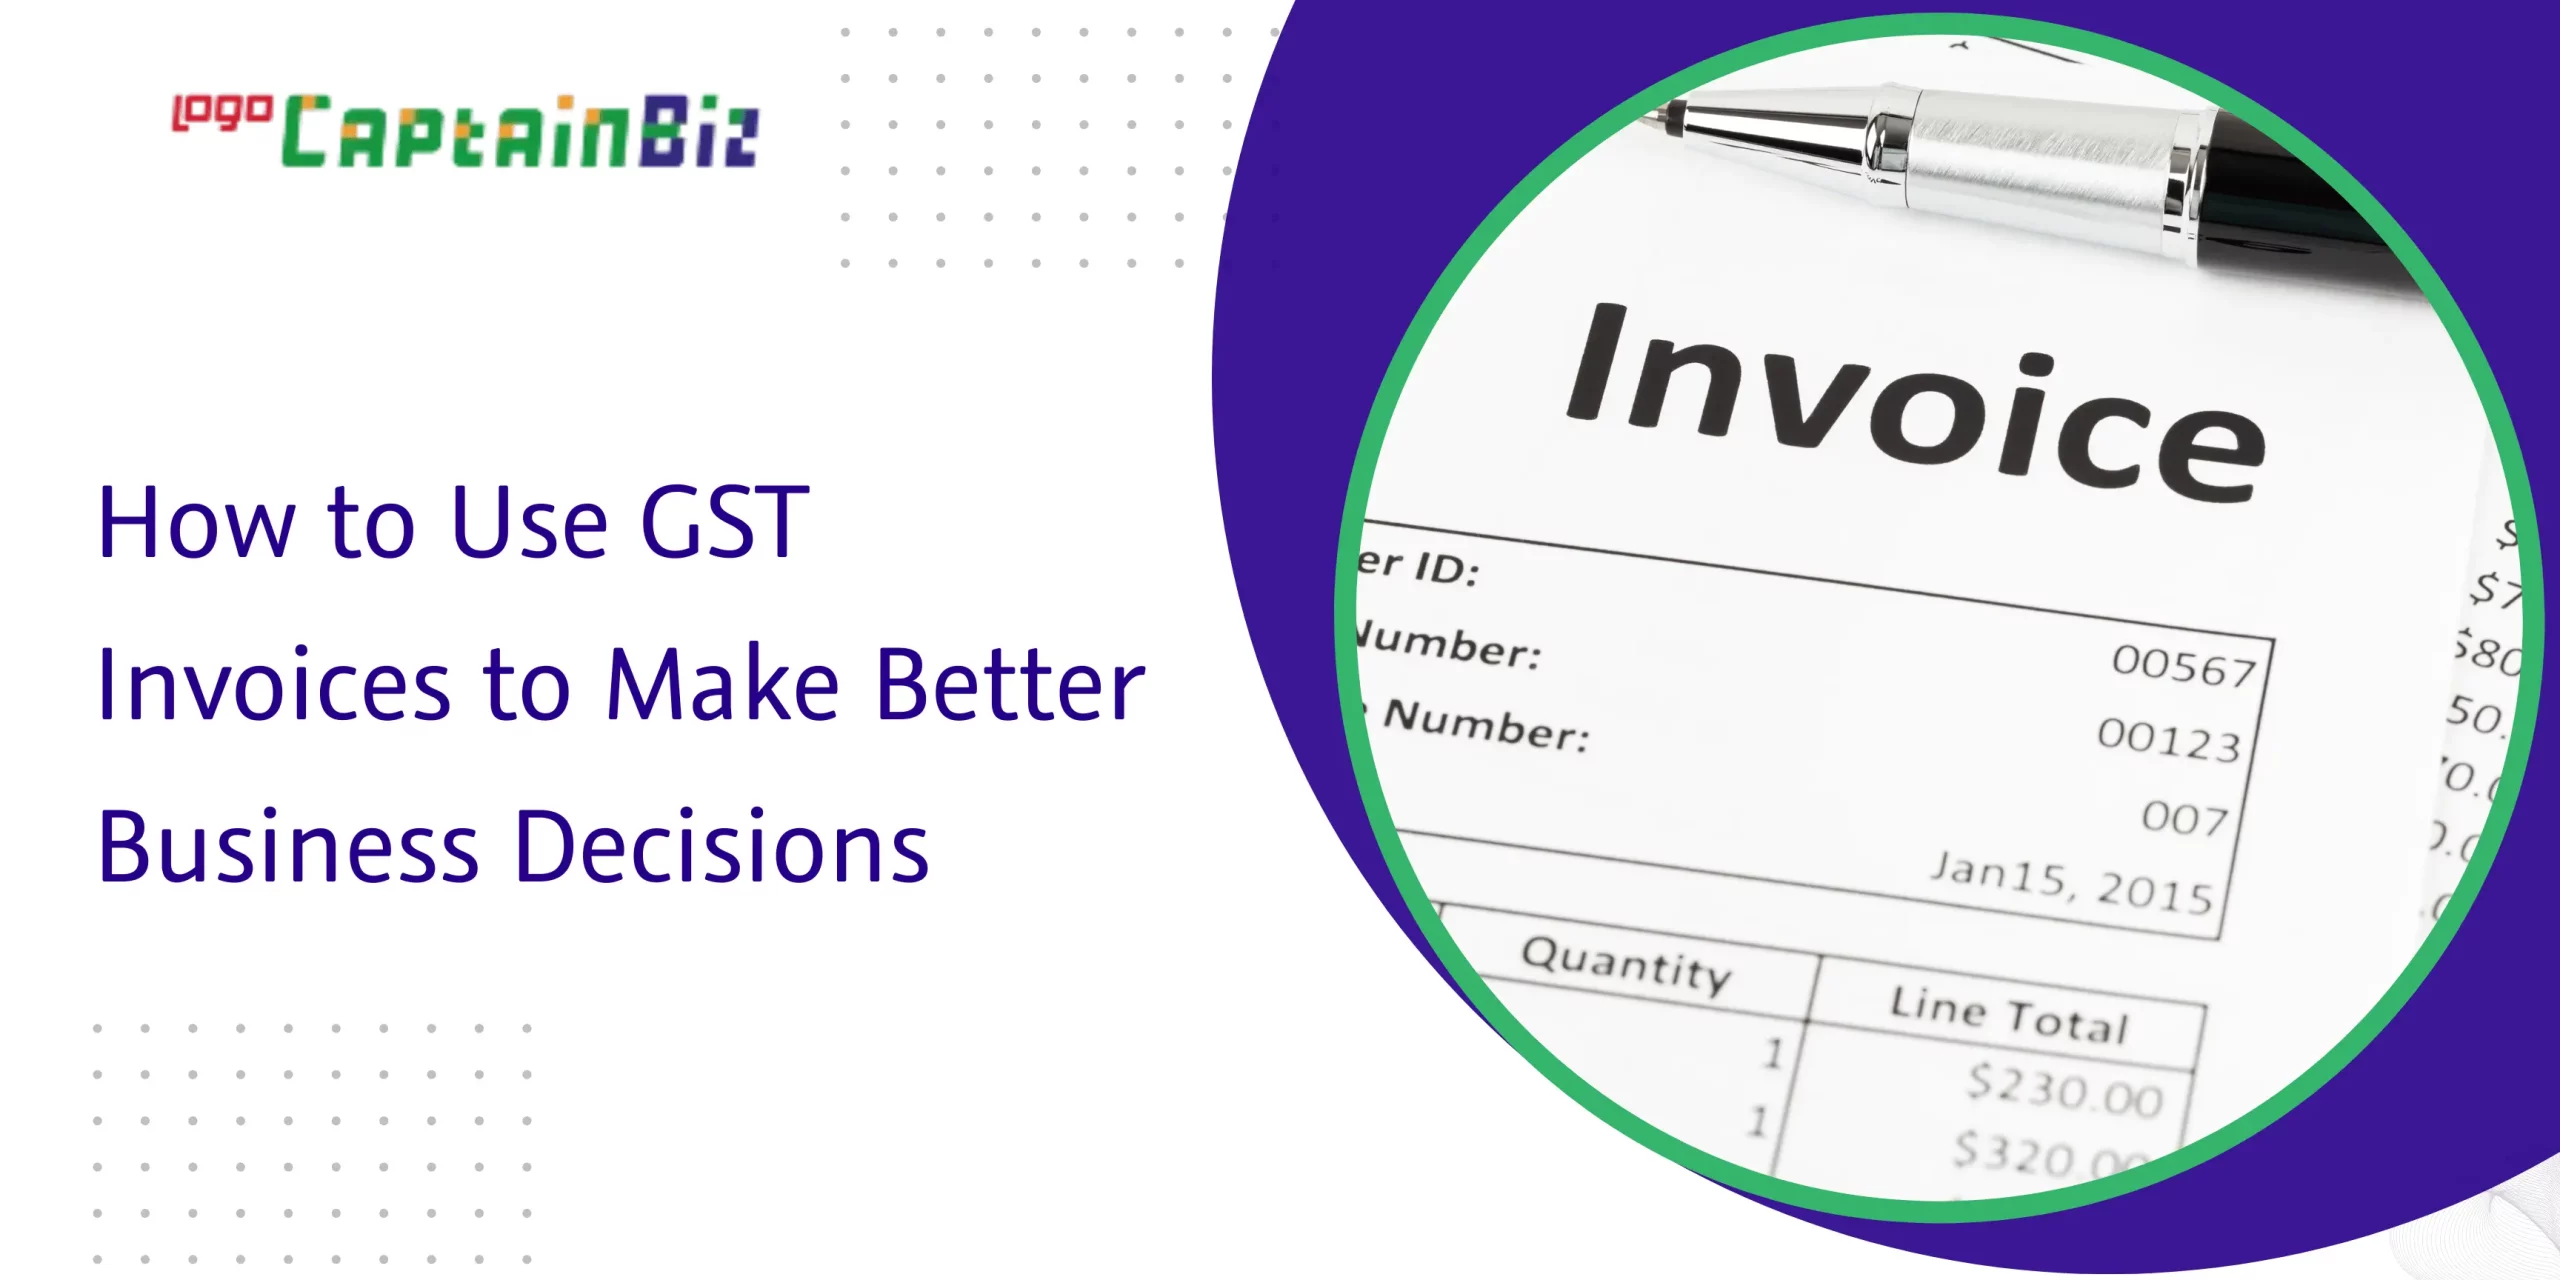 CaptainBiz: how to use gst invoices to make better business decisions